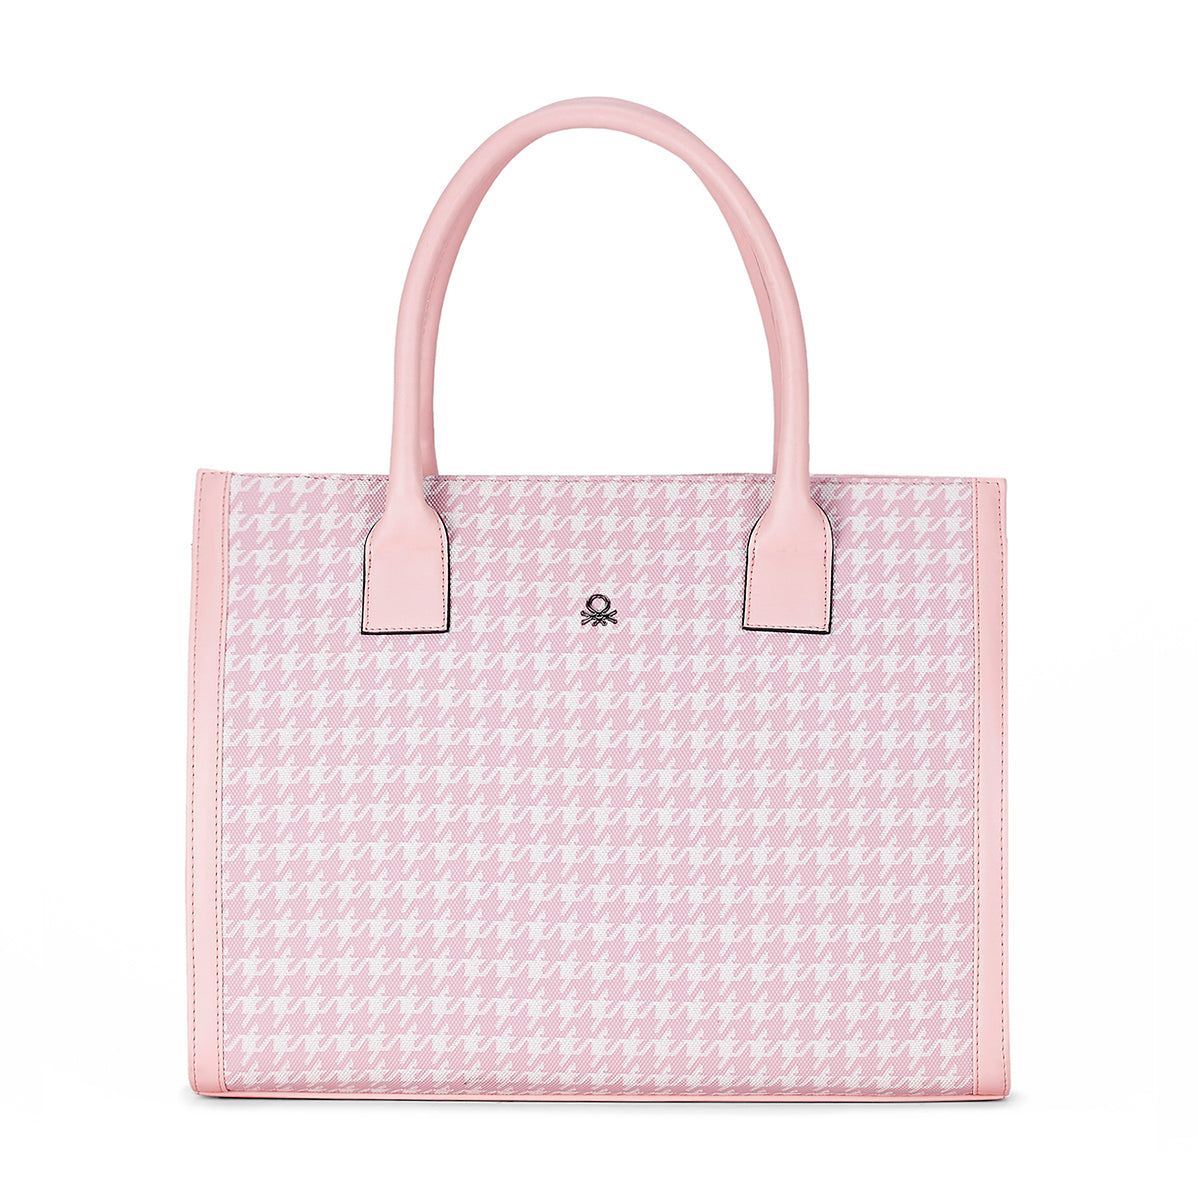 United Colors of Benetton Angelica Woman's PU Shopper Tote-pink